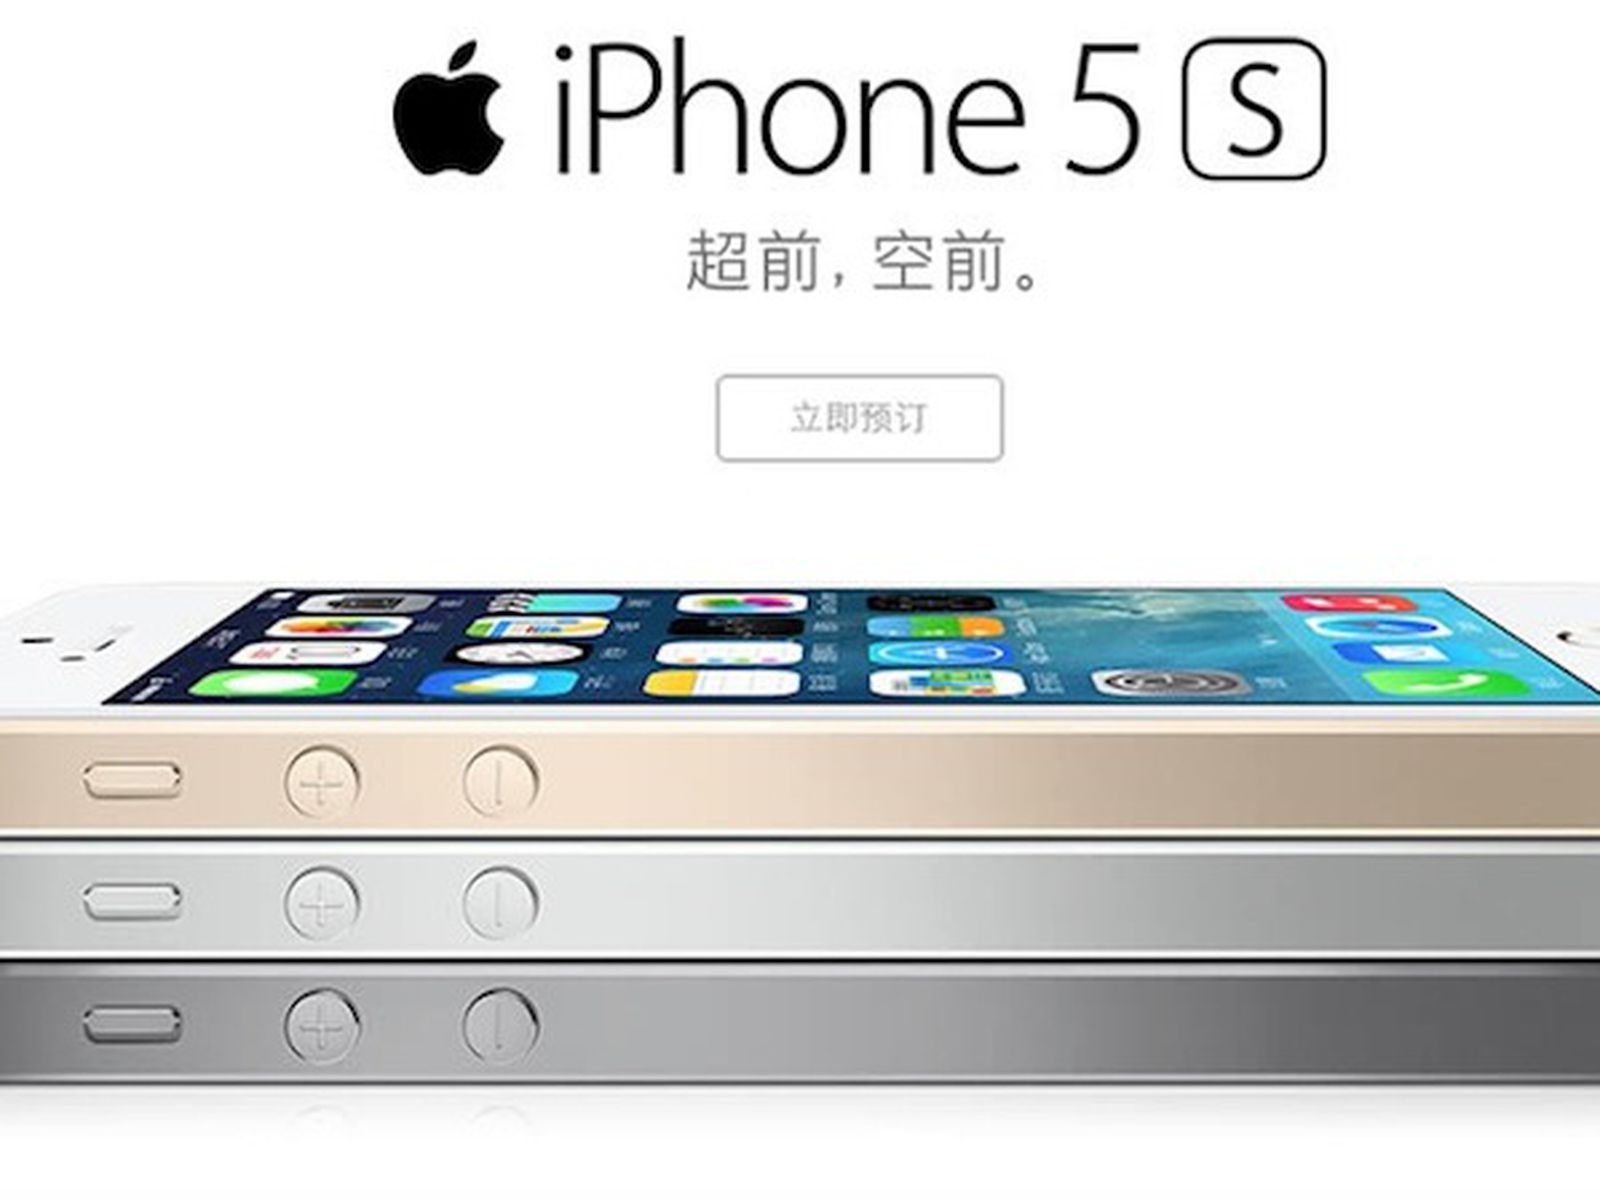 iPhone 5s Demand Wanes in China, While Interest in iPhone 6